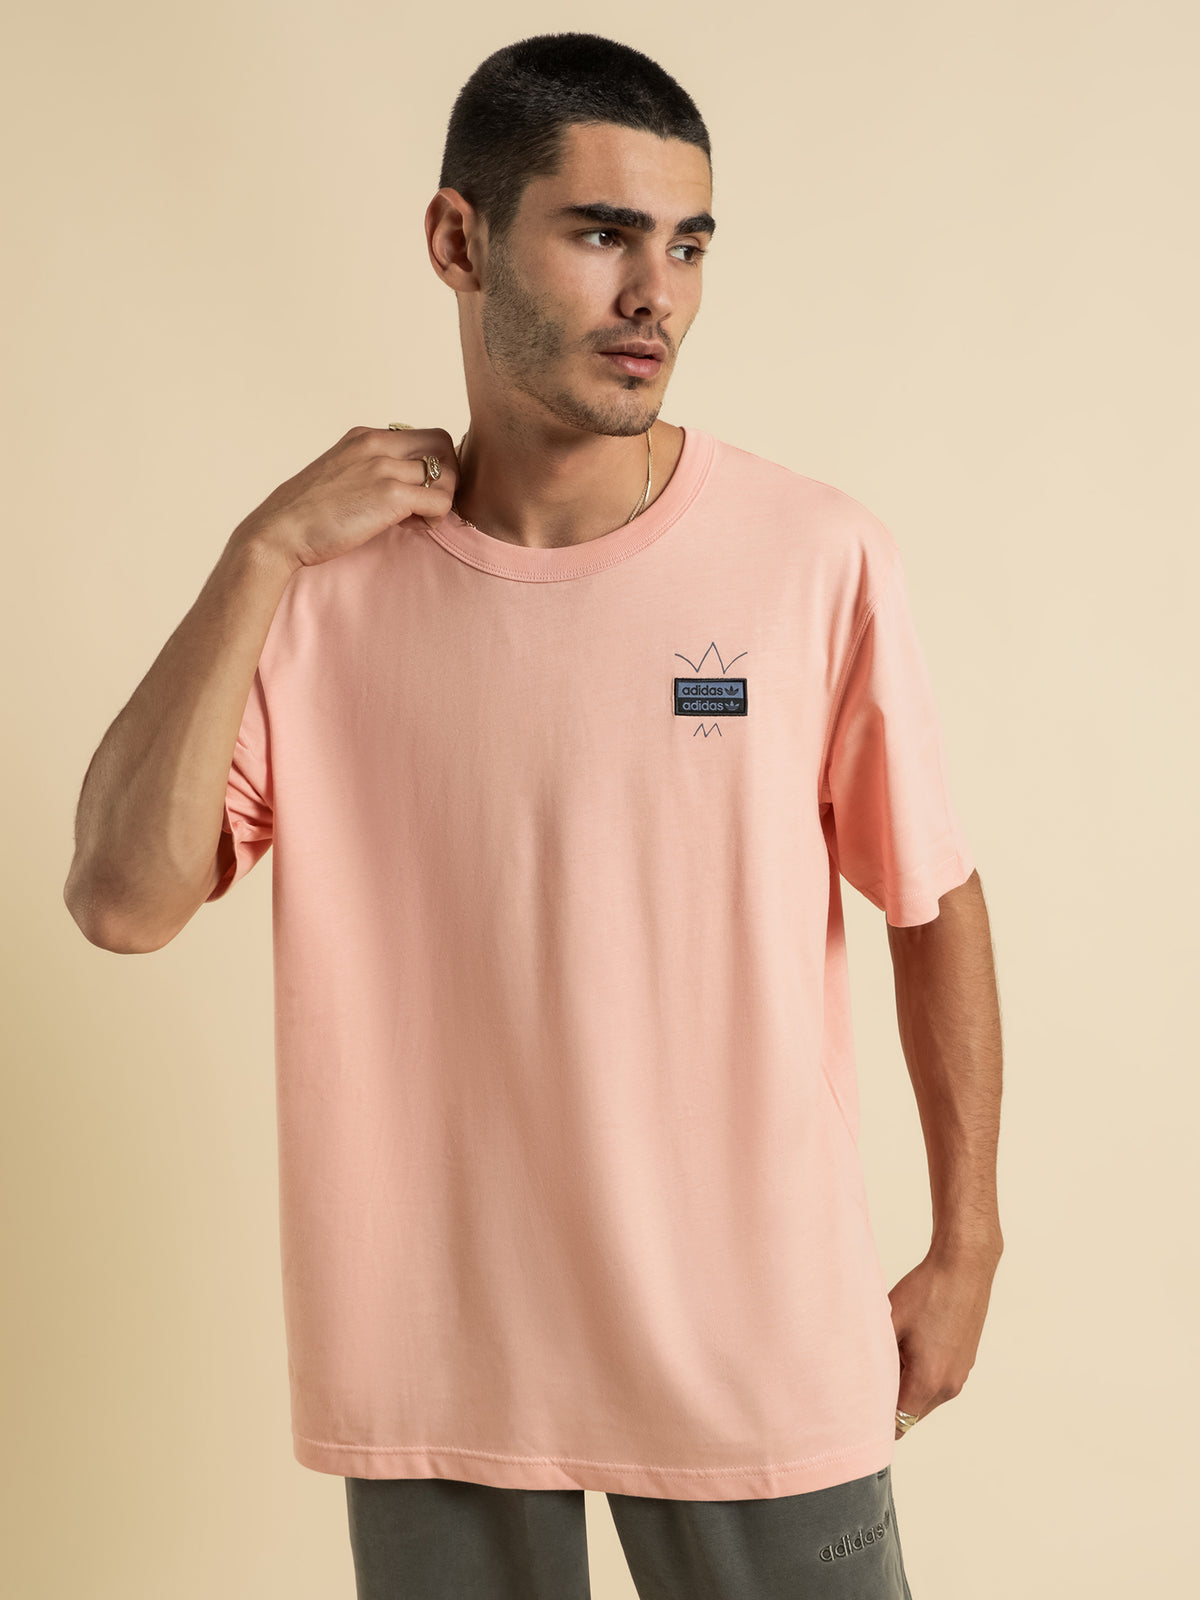 R.Y.V Abstract Original T-Shirt in Dust Pink